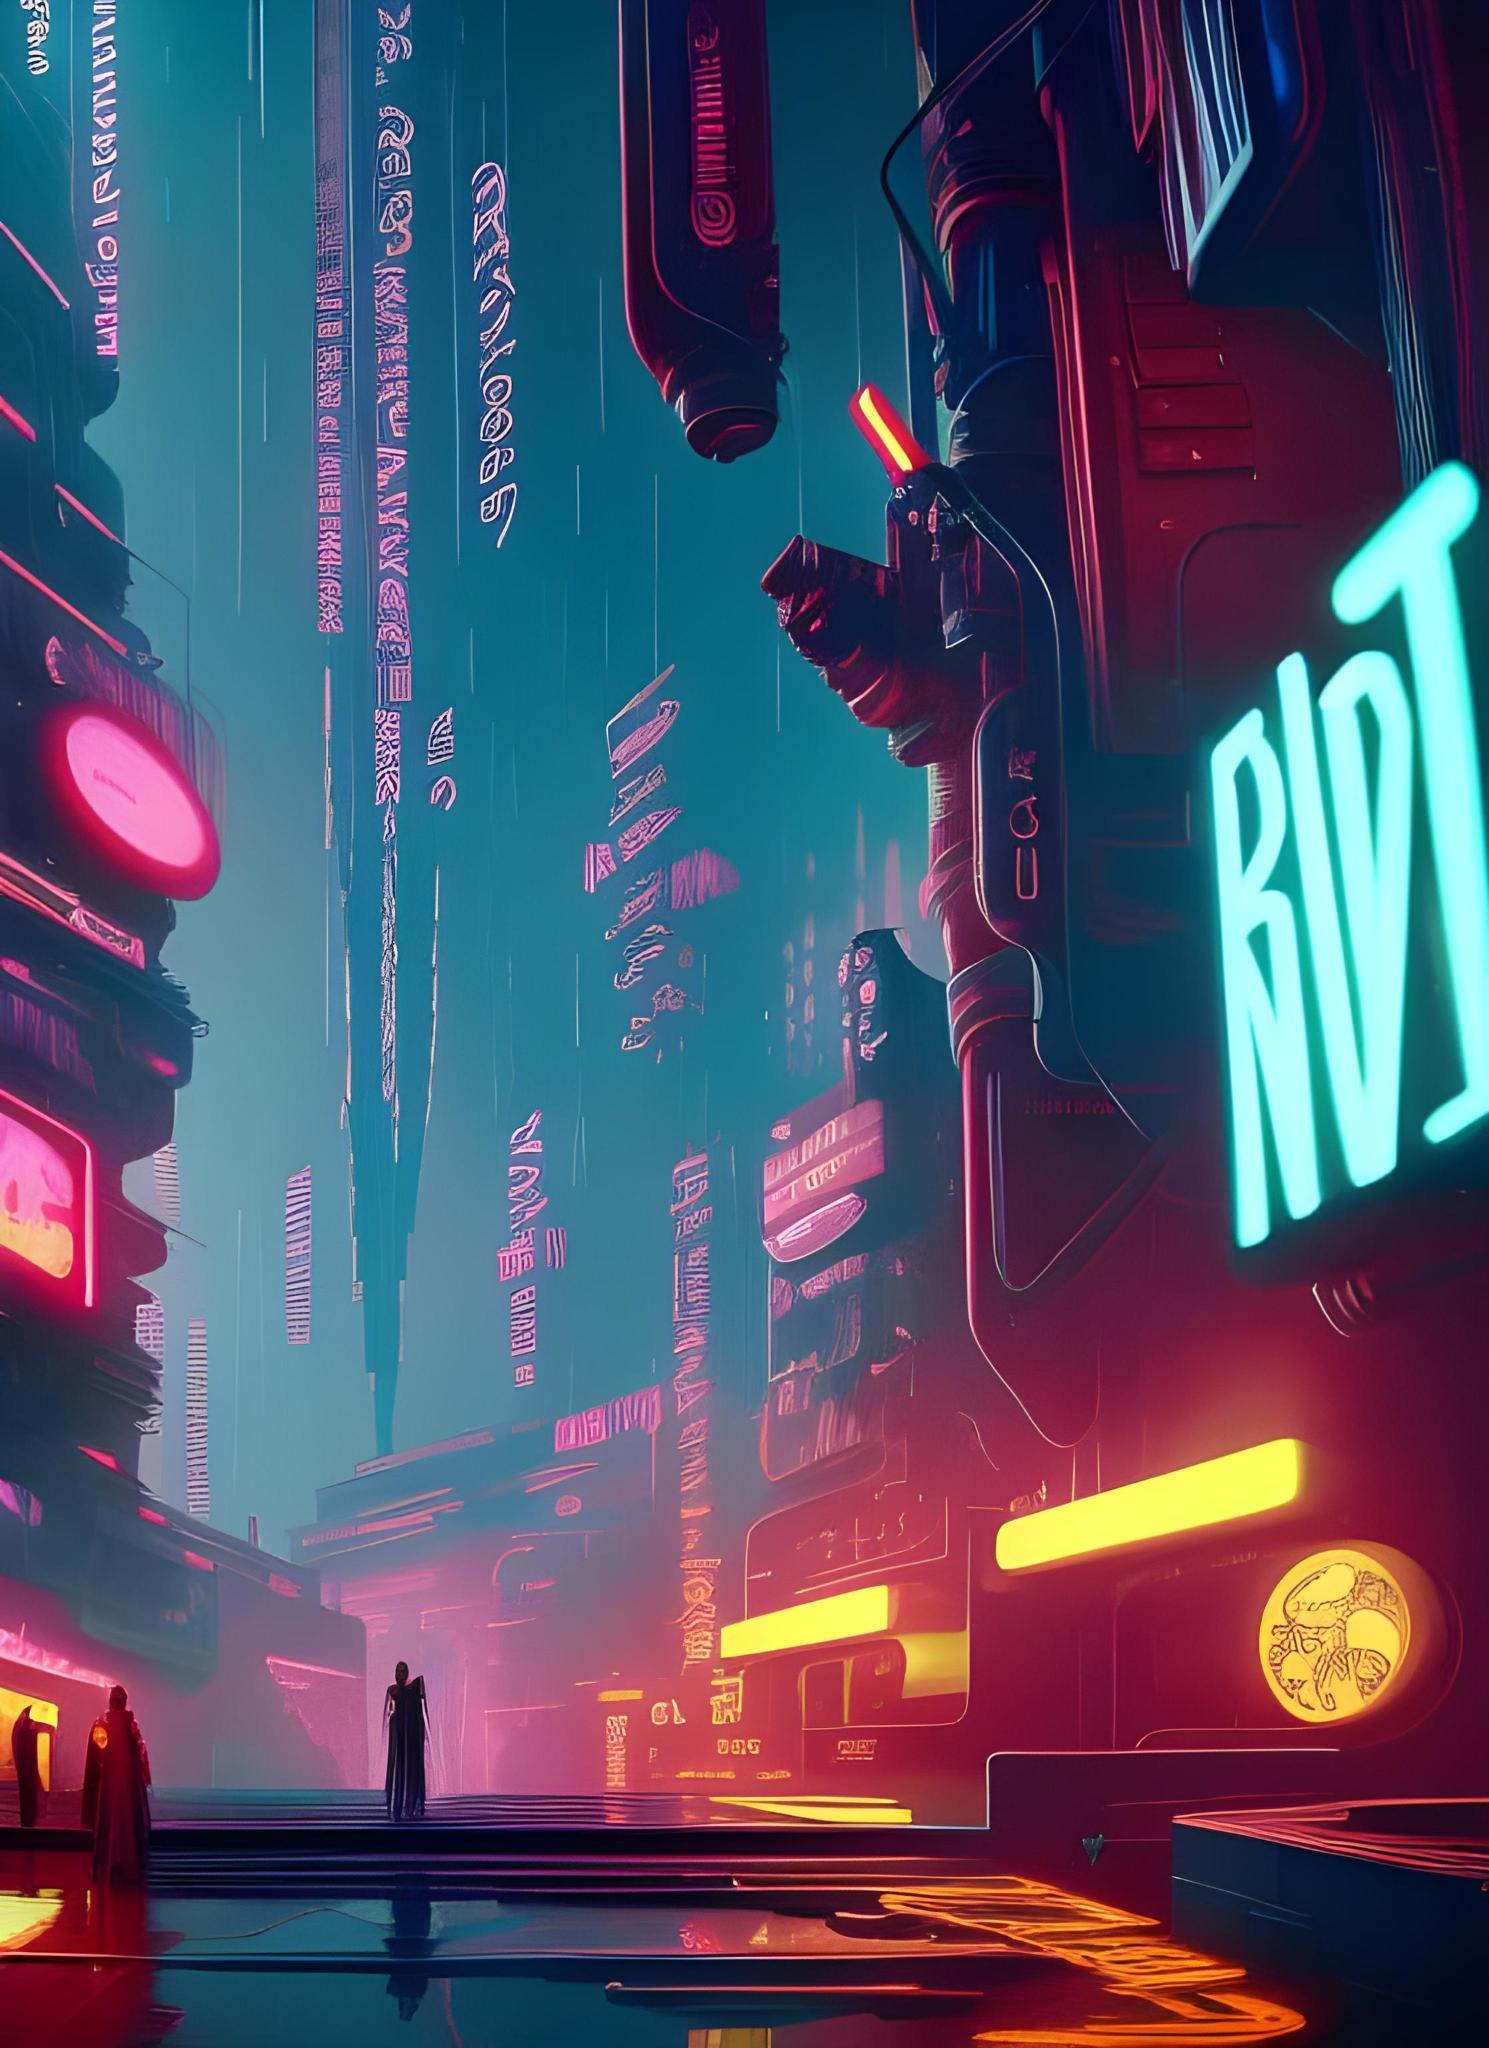 ai stable diffusion generated image of a cyber city, a large neon sign says 